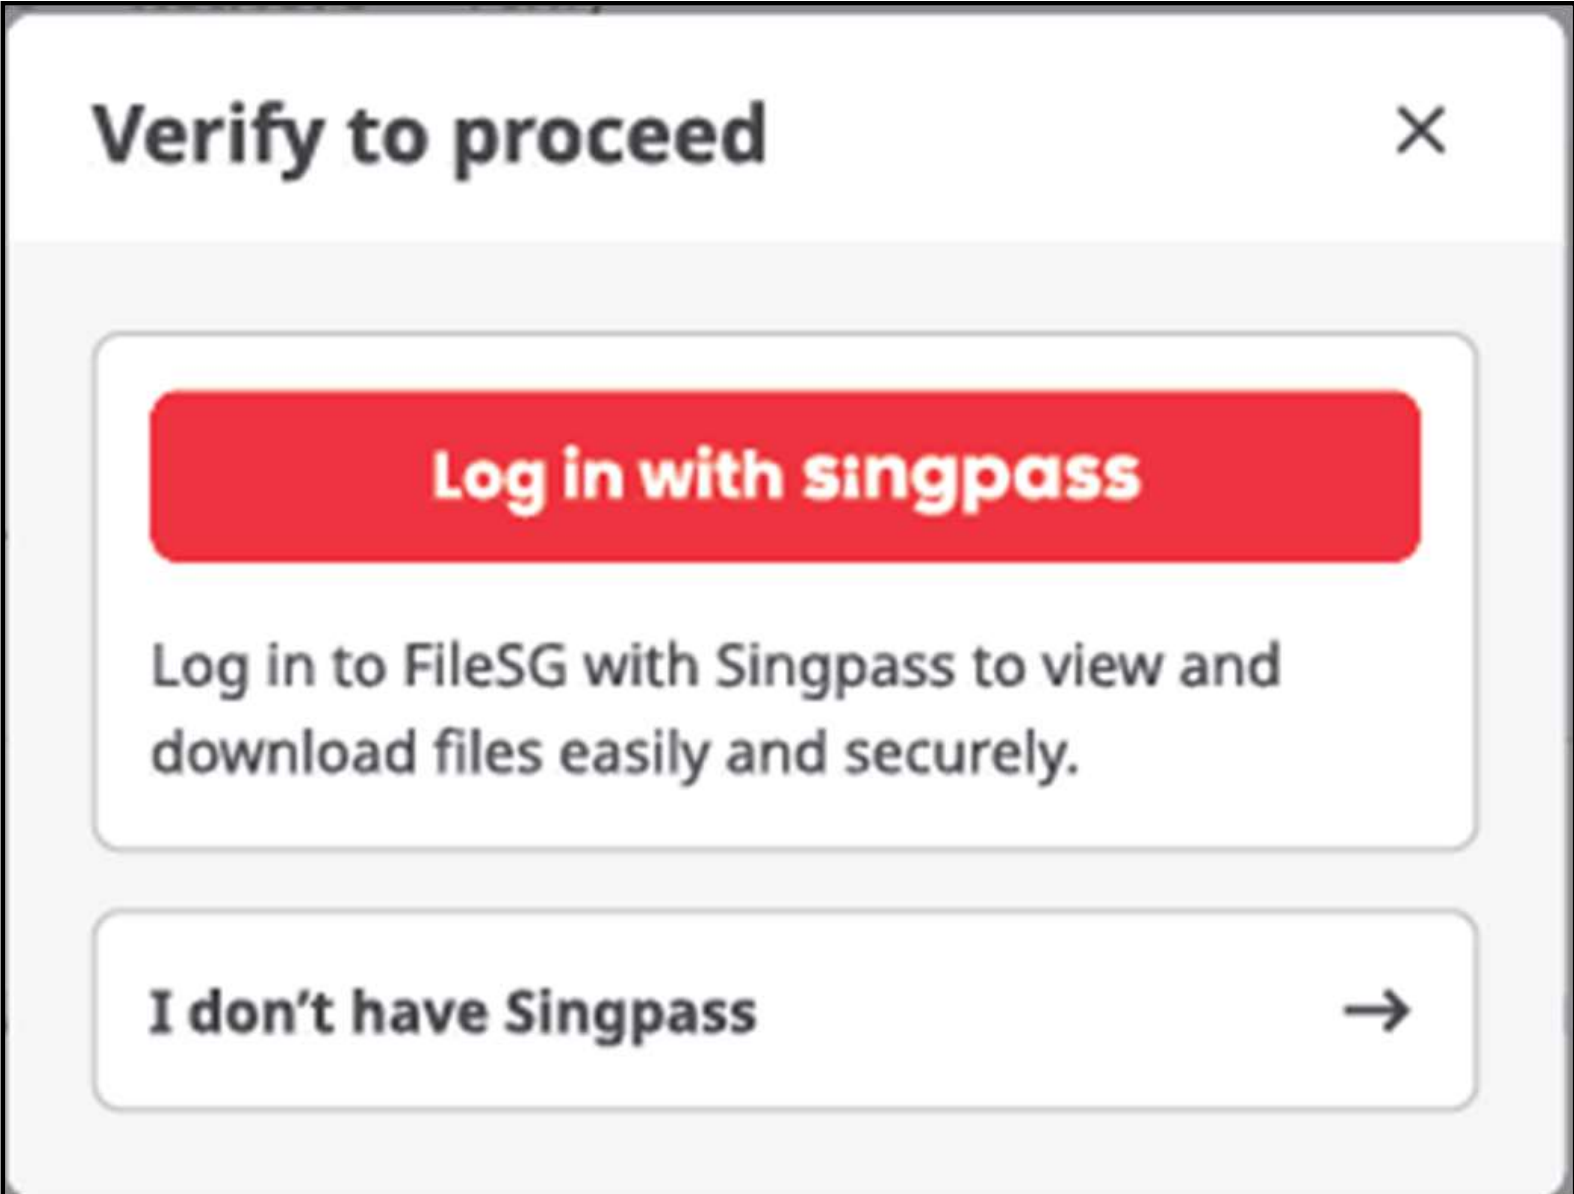 Proceed with clicking on I don't have Singapass